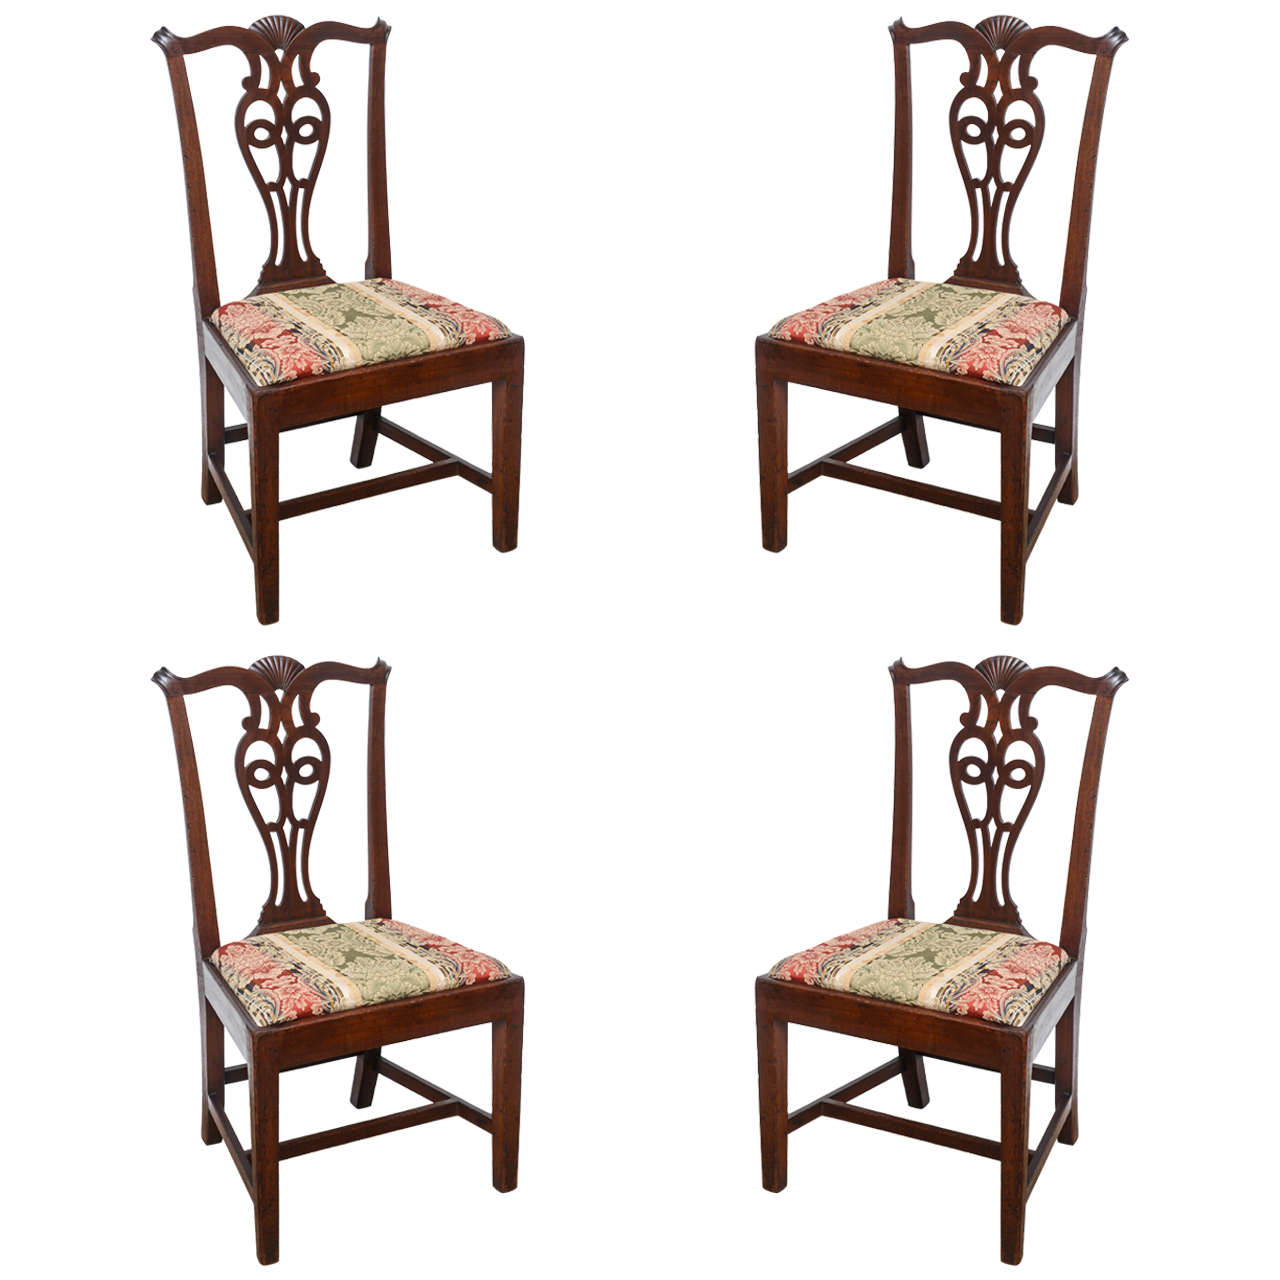 Set of Four George III Period Side Chairs, circa 1810-1830